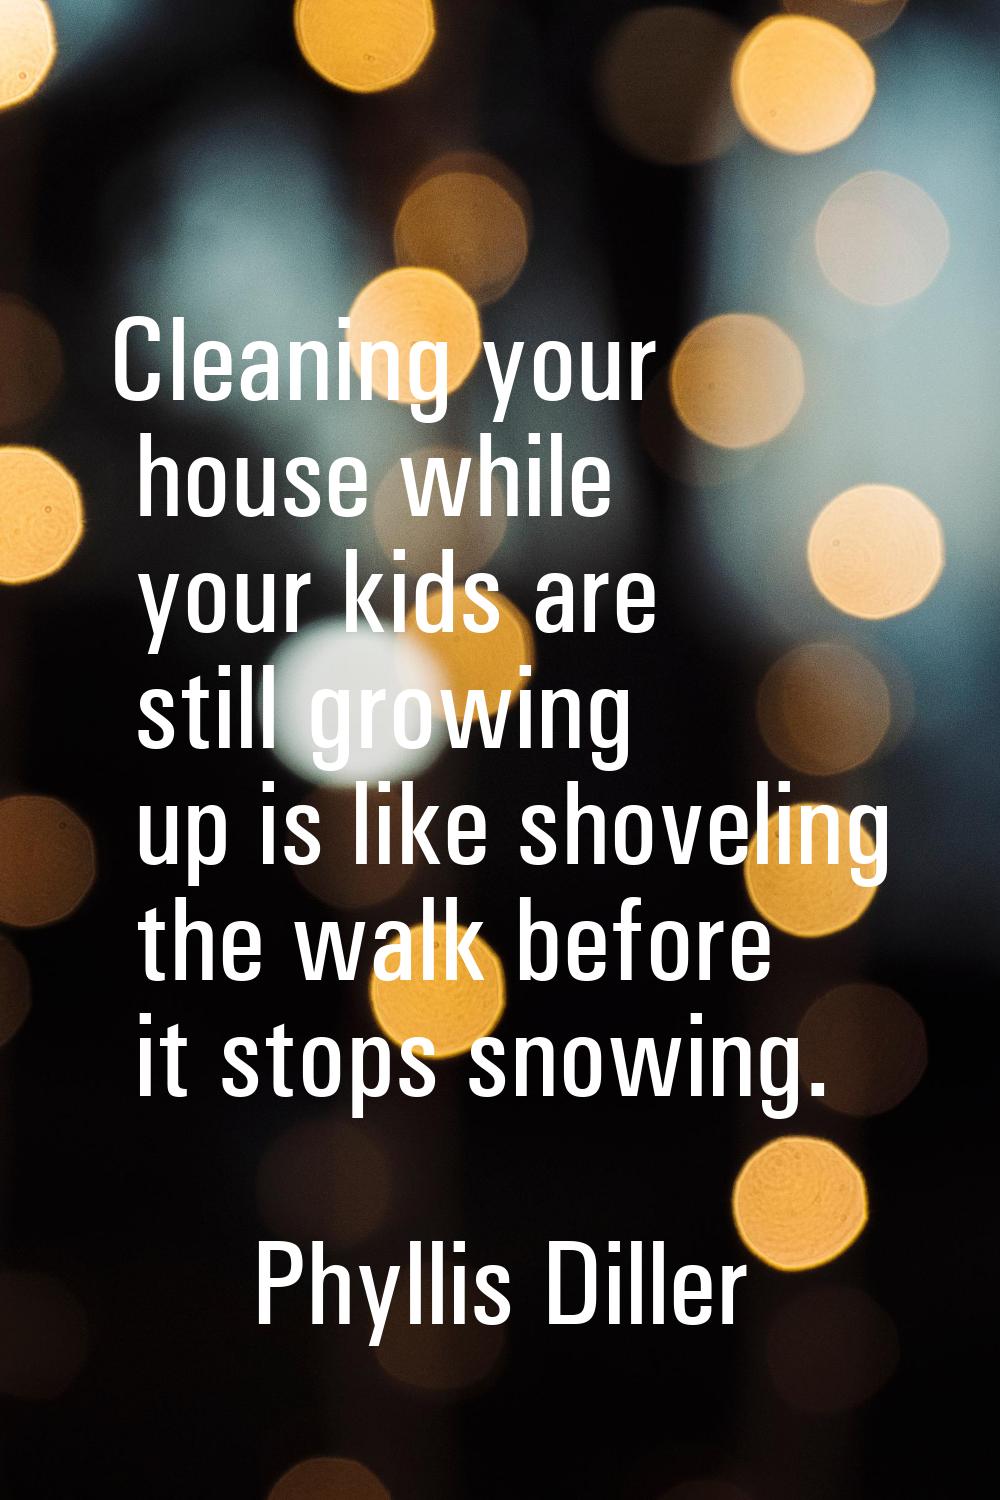 Cleaning your house while your kids are still growing up is like shoveling the walk before it stops